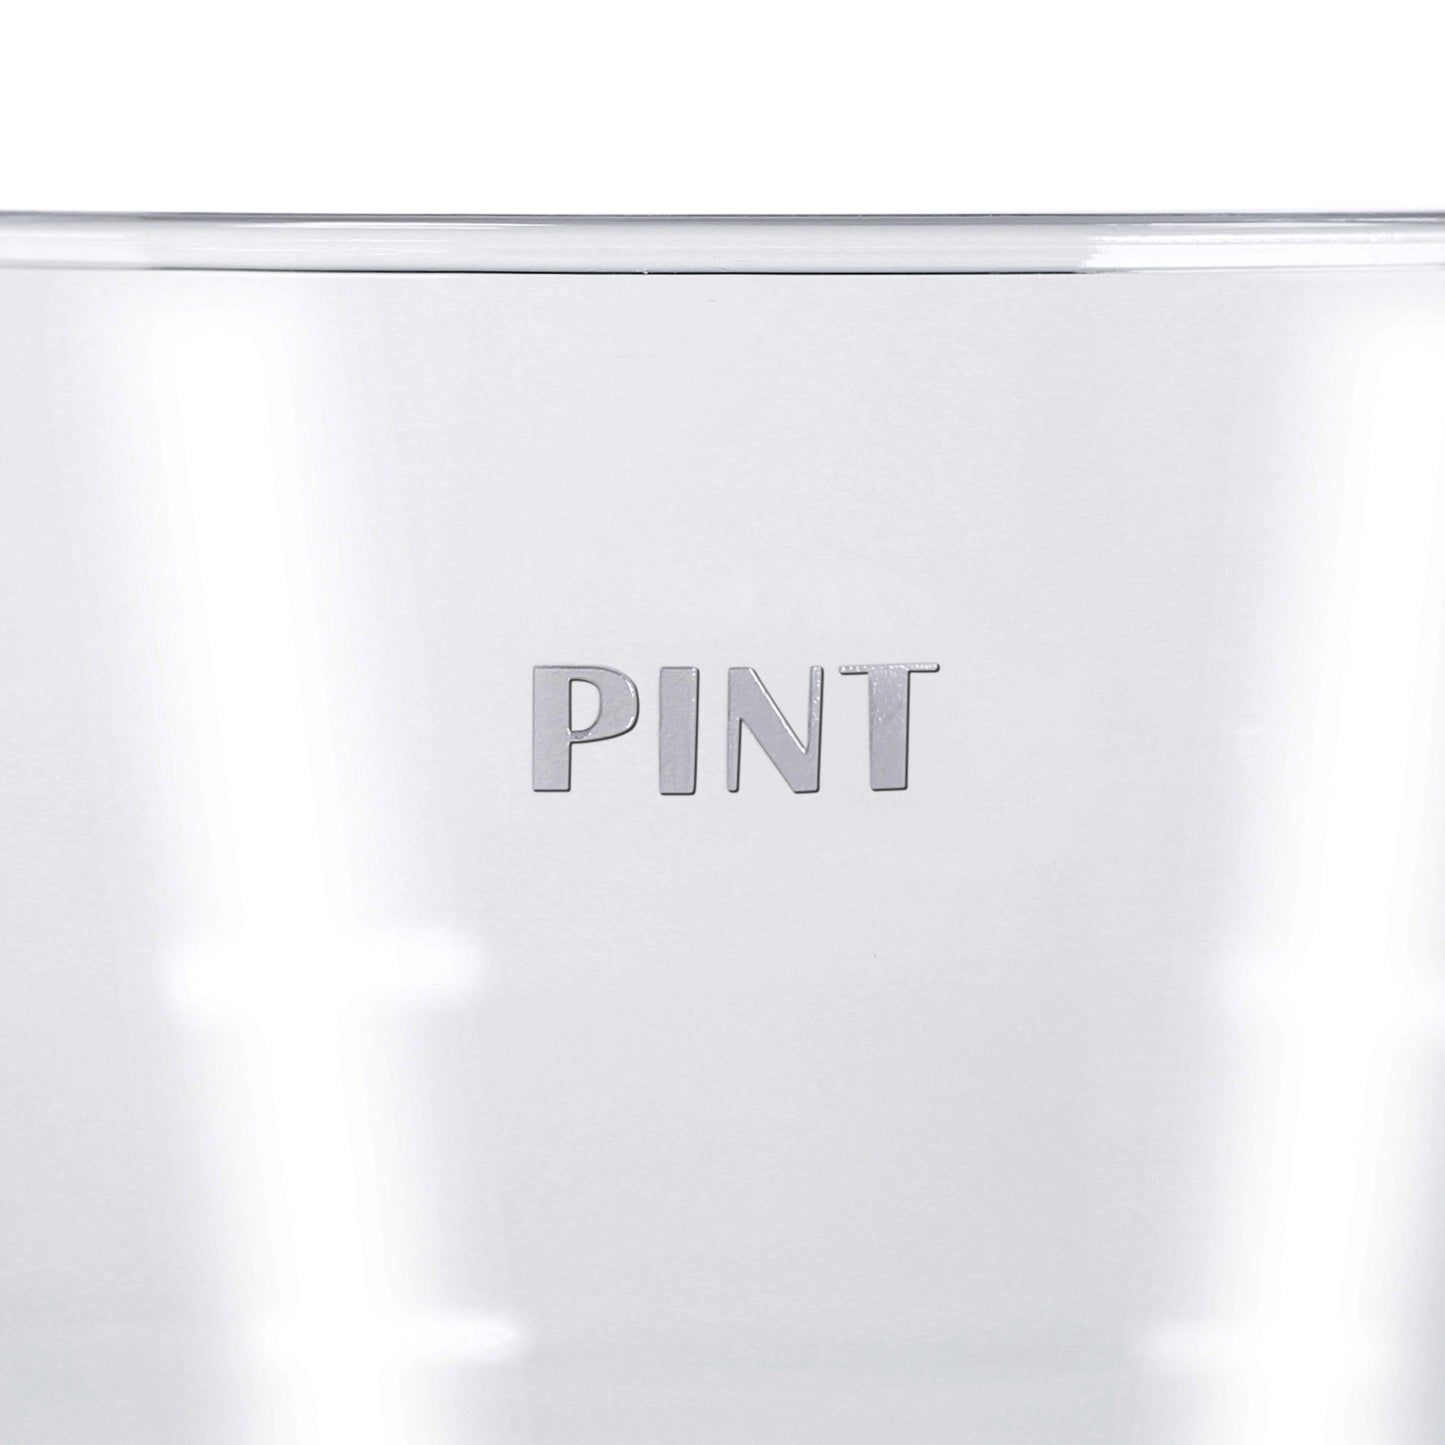 50 x Pint Glasses 568ml Transparent Clear Strong Reusable Plastic CE Marked Beer Cider Lager Drinks Stackable Dishwasher Safe-5056020179993-PCUP-PINTx50-Product Pro-Clear, Pint, Pint Glasses, Plastic Pint Glasses